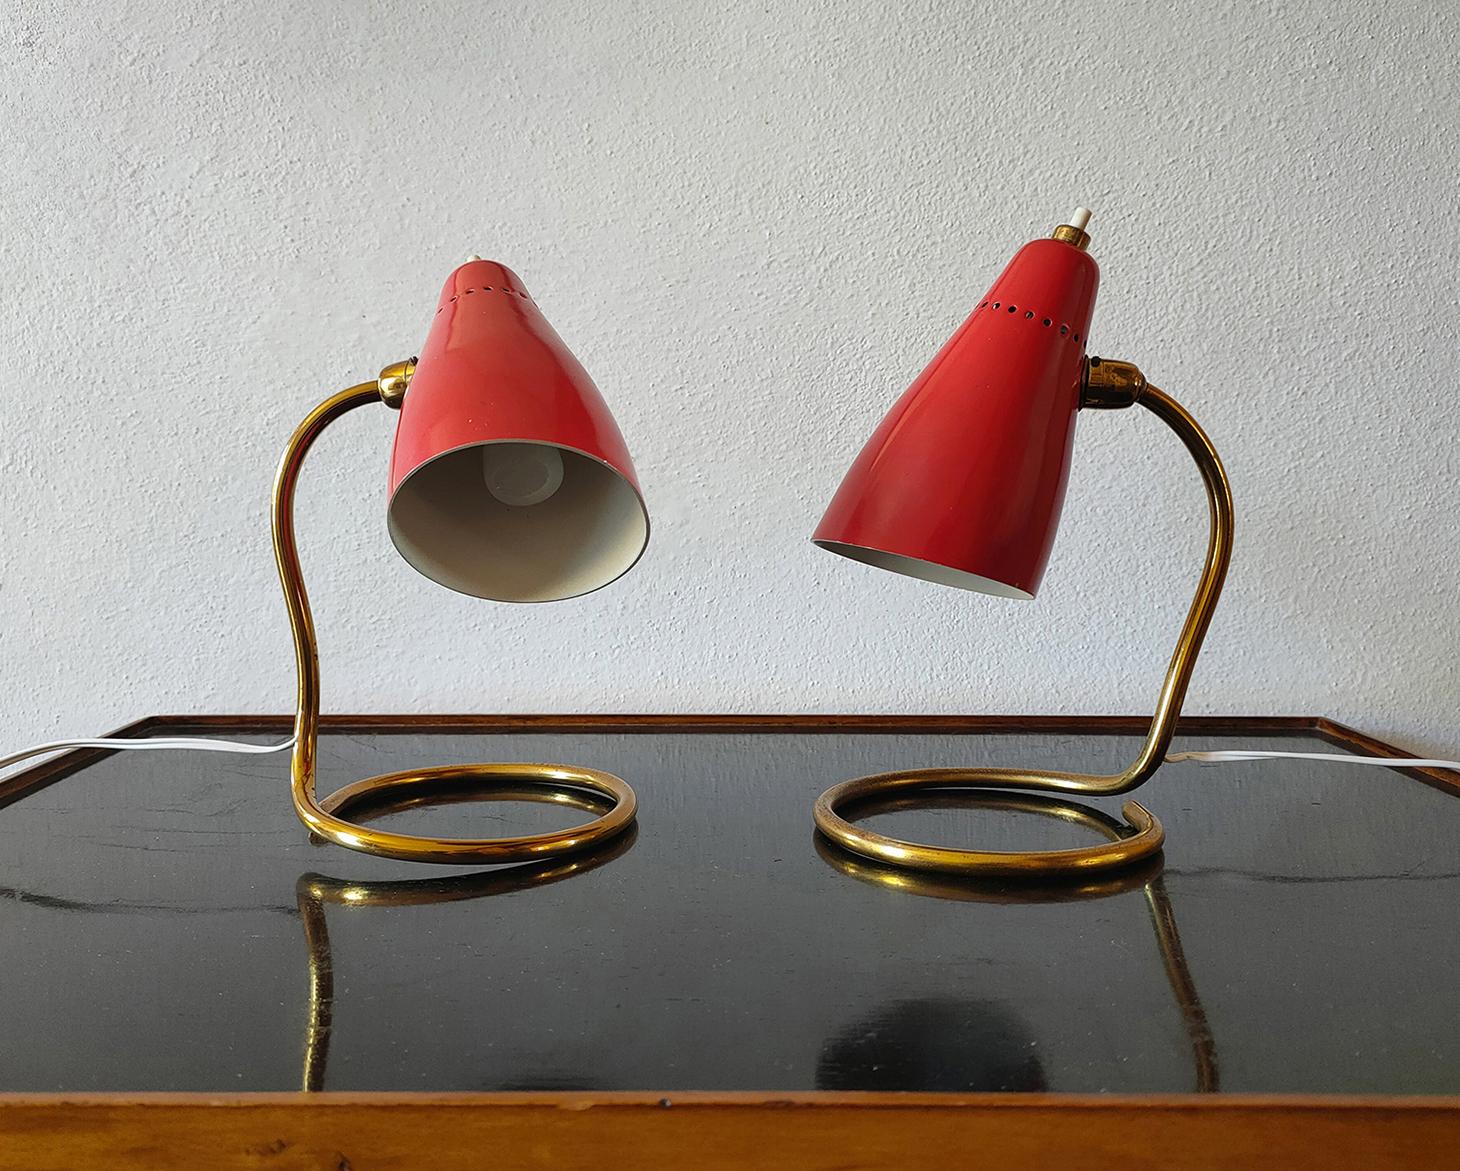 Italian Giuseppe Ostuni Set of Two Table Lamps 214 or Vipere by O-luce 1950s Italy For Sale